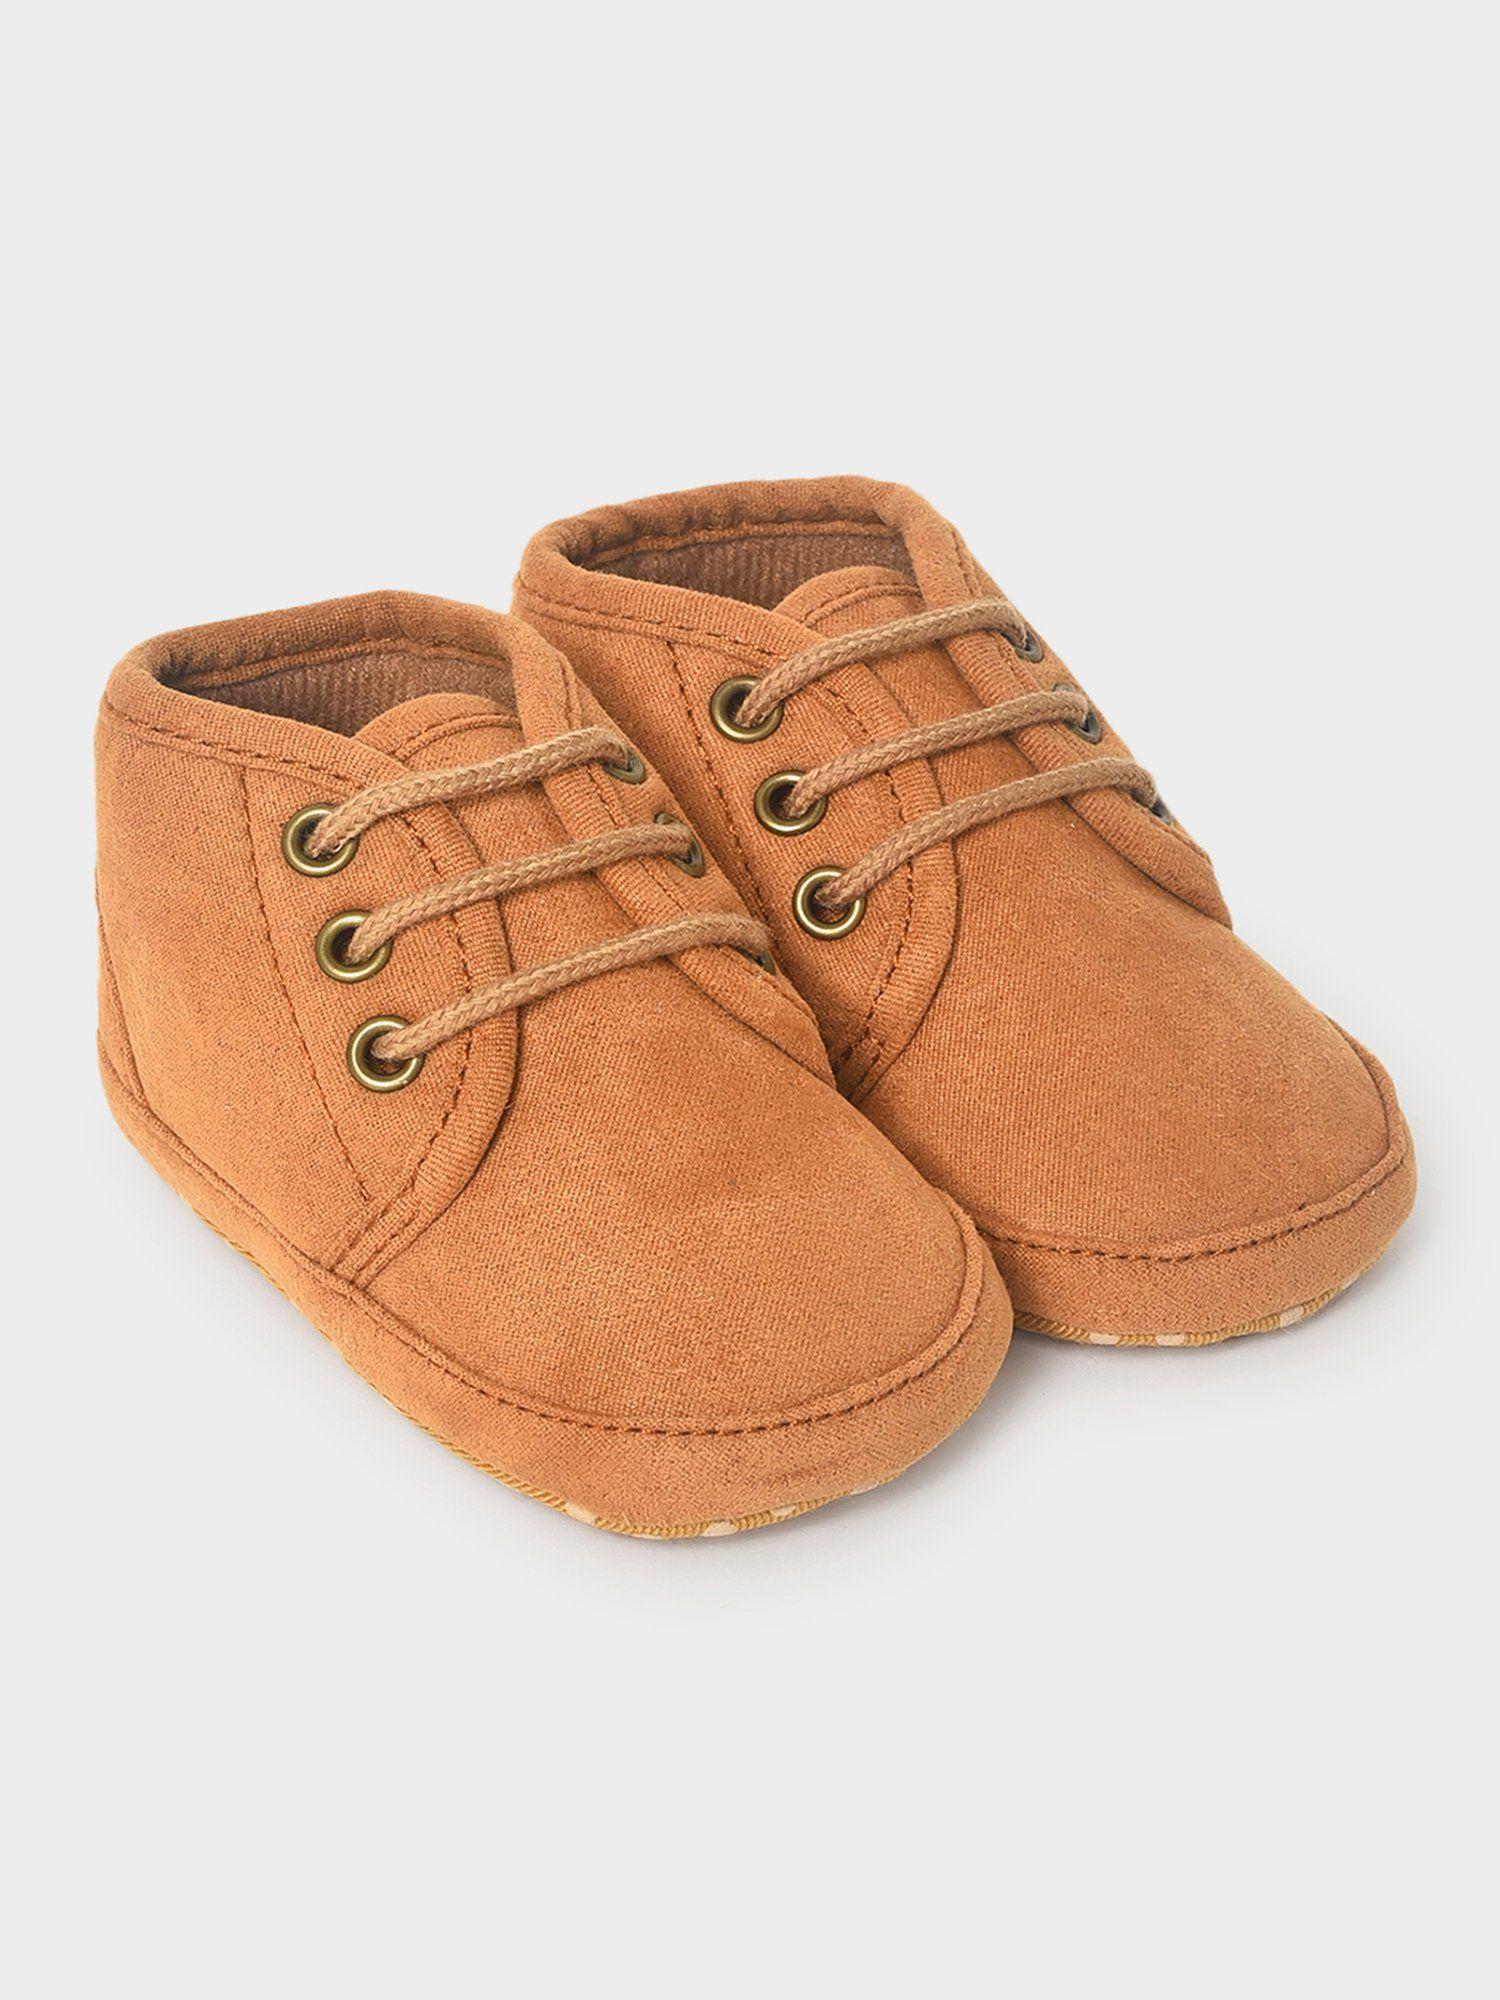 brown rexine shoes for boys